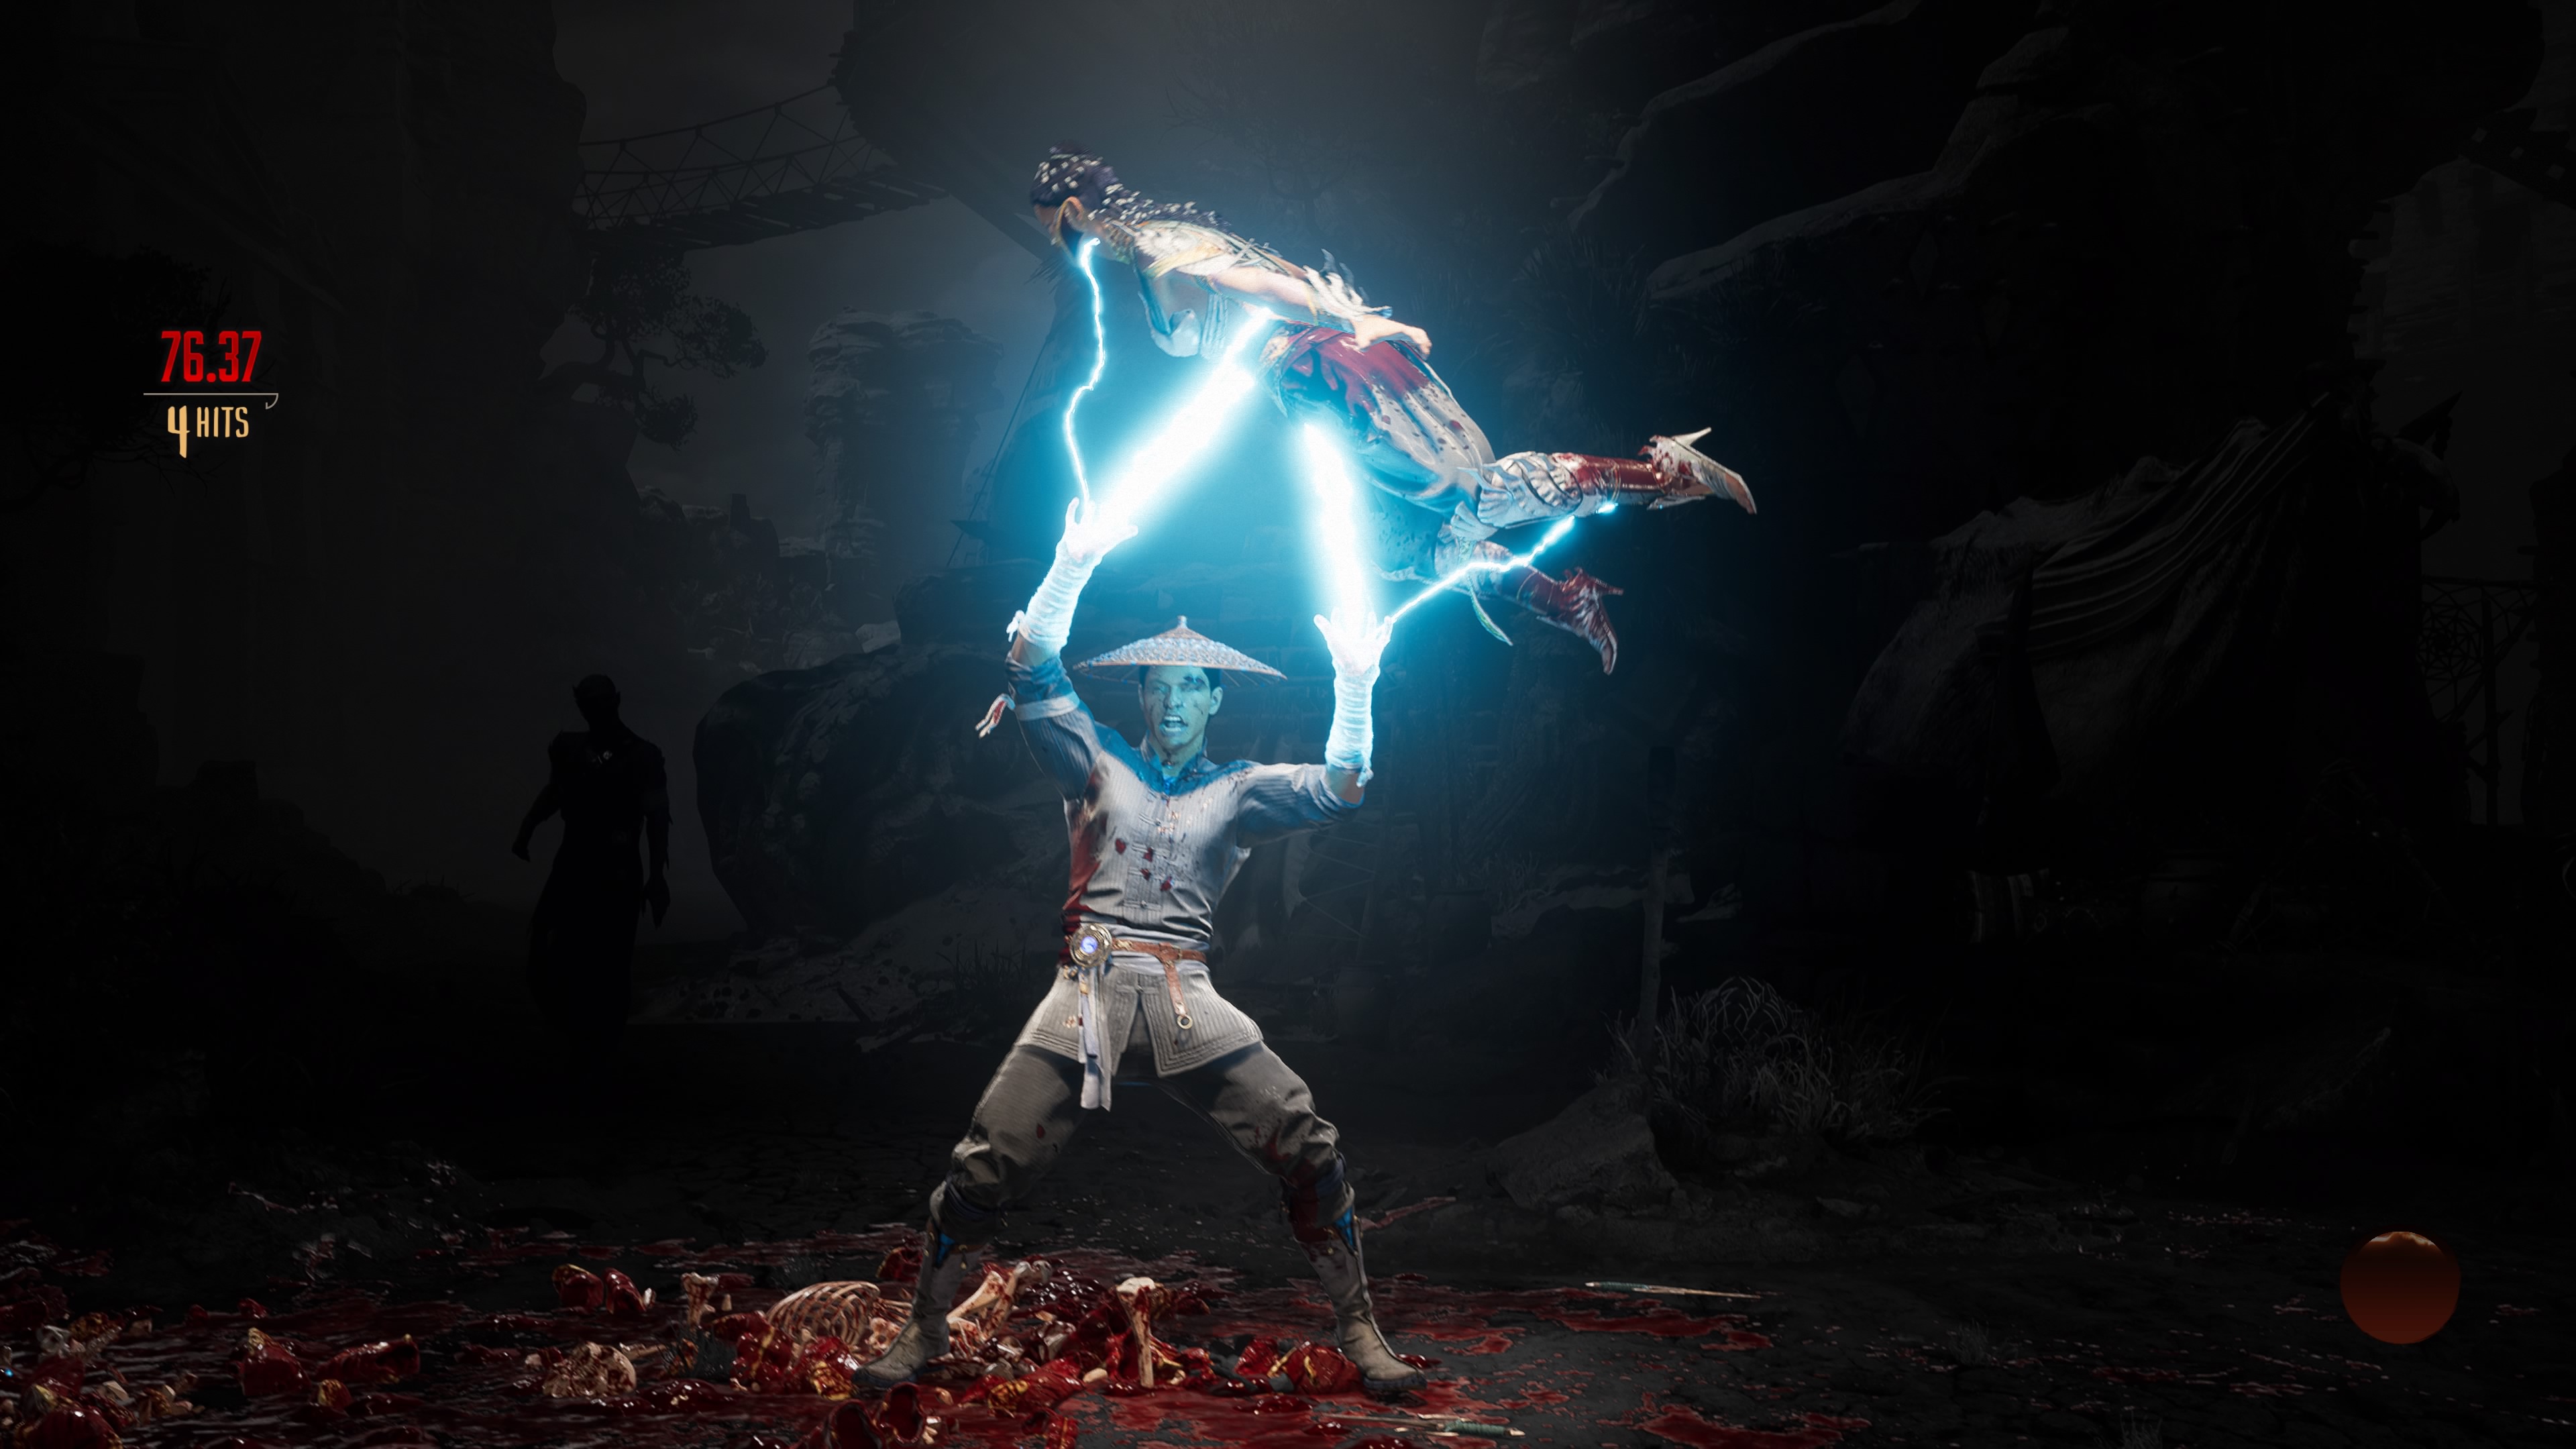 Raiden lifts another player over his head using lightning in Mortal Kombat 1